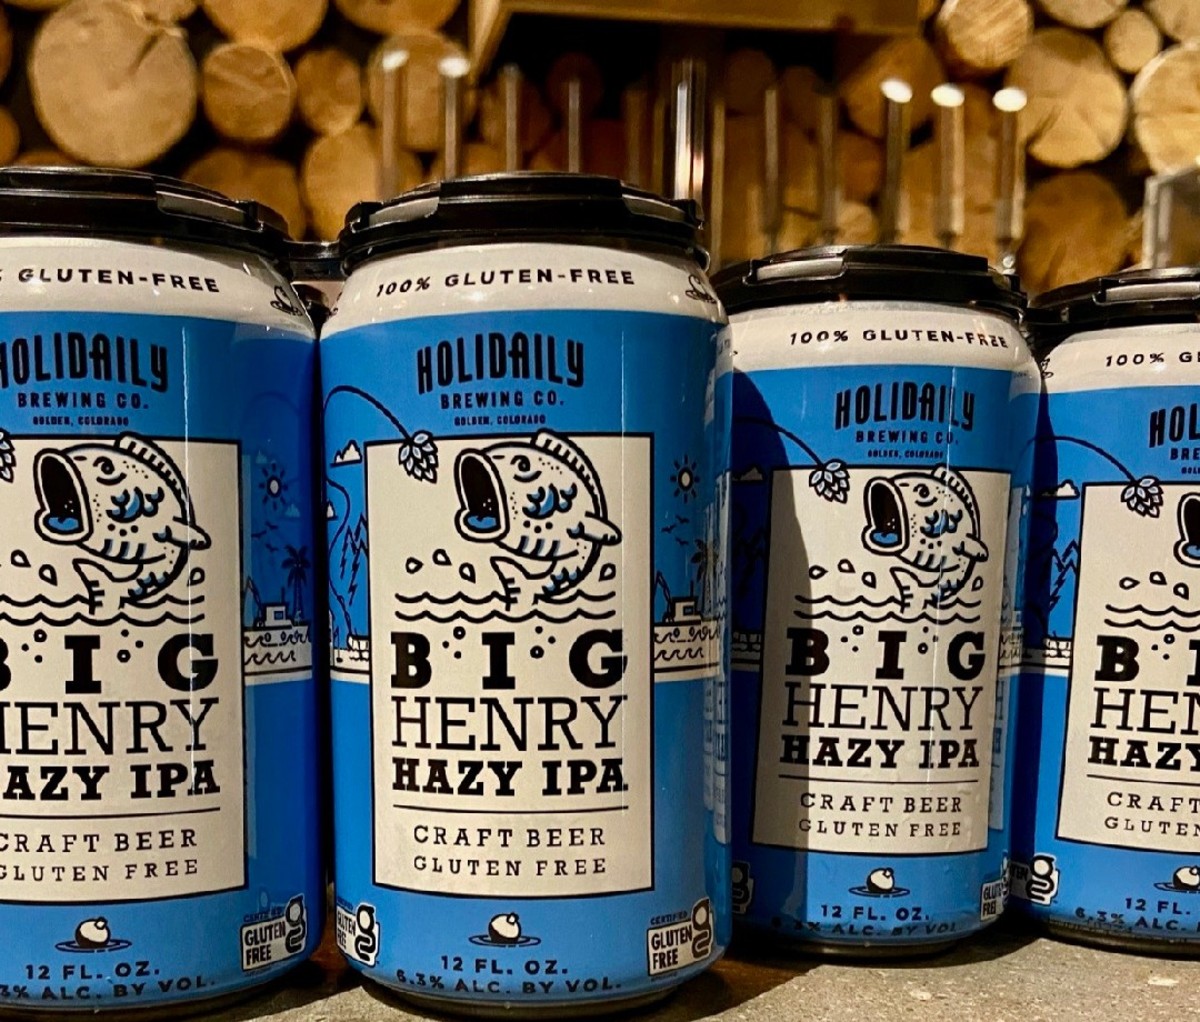 Four cans of Holidaily Brewing Company Big Henry Hazy IPA with cut logs in the background.